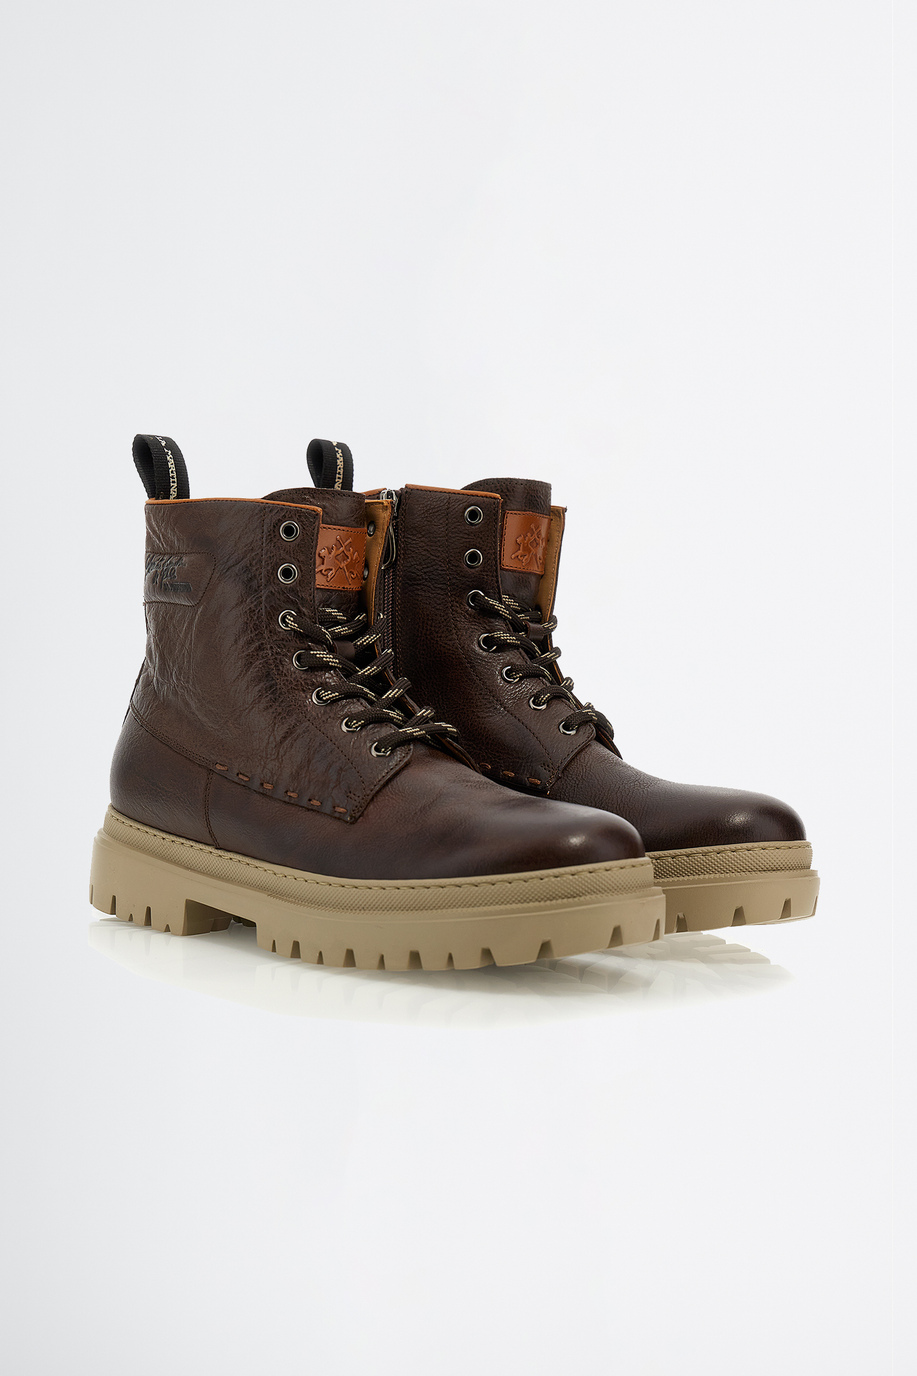 Mountain ankle boot in leather - test 2 | La Martina - Official Online Shop